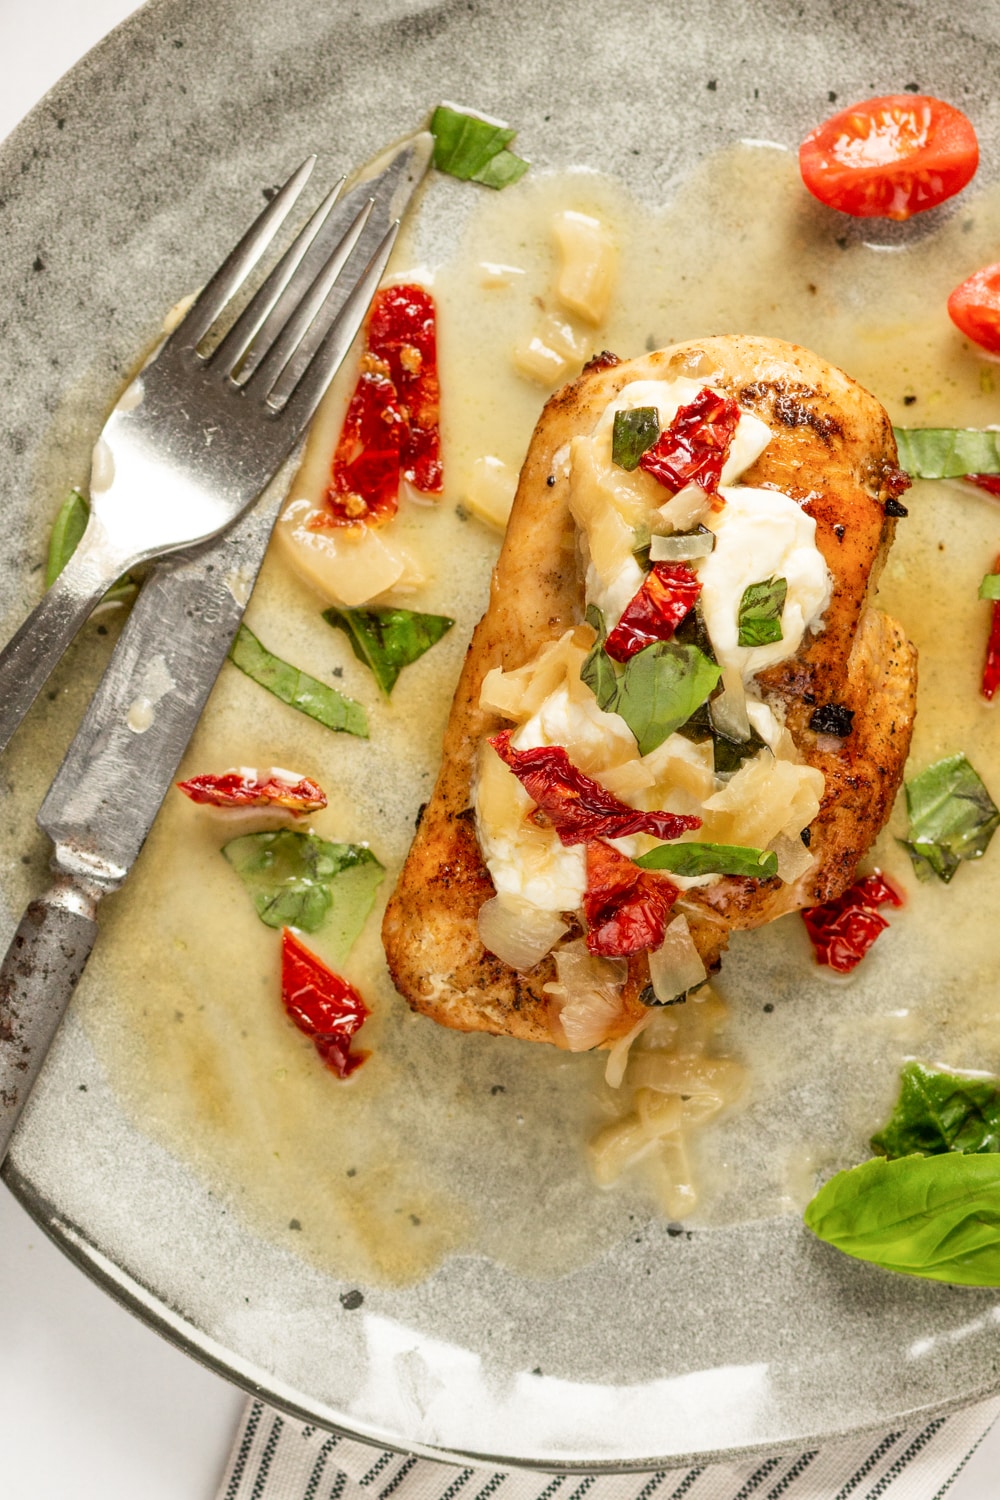 A grey plate with a chicken breast on it. The chicken breast is topped with goat cheese, sun-dried tomatoes, and basil.